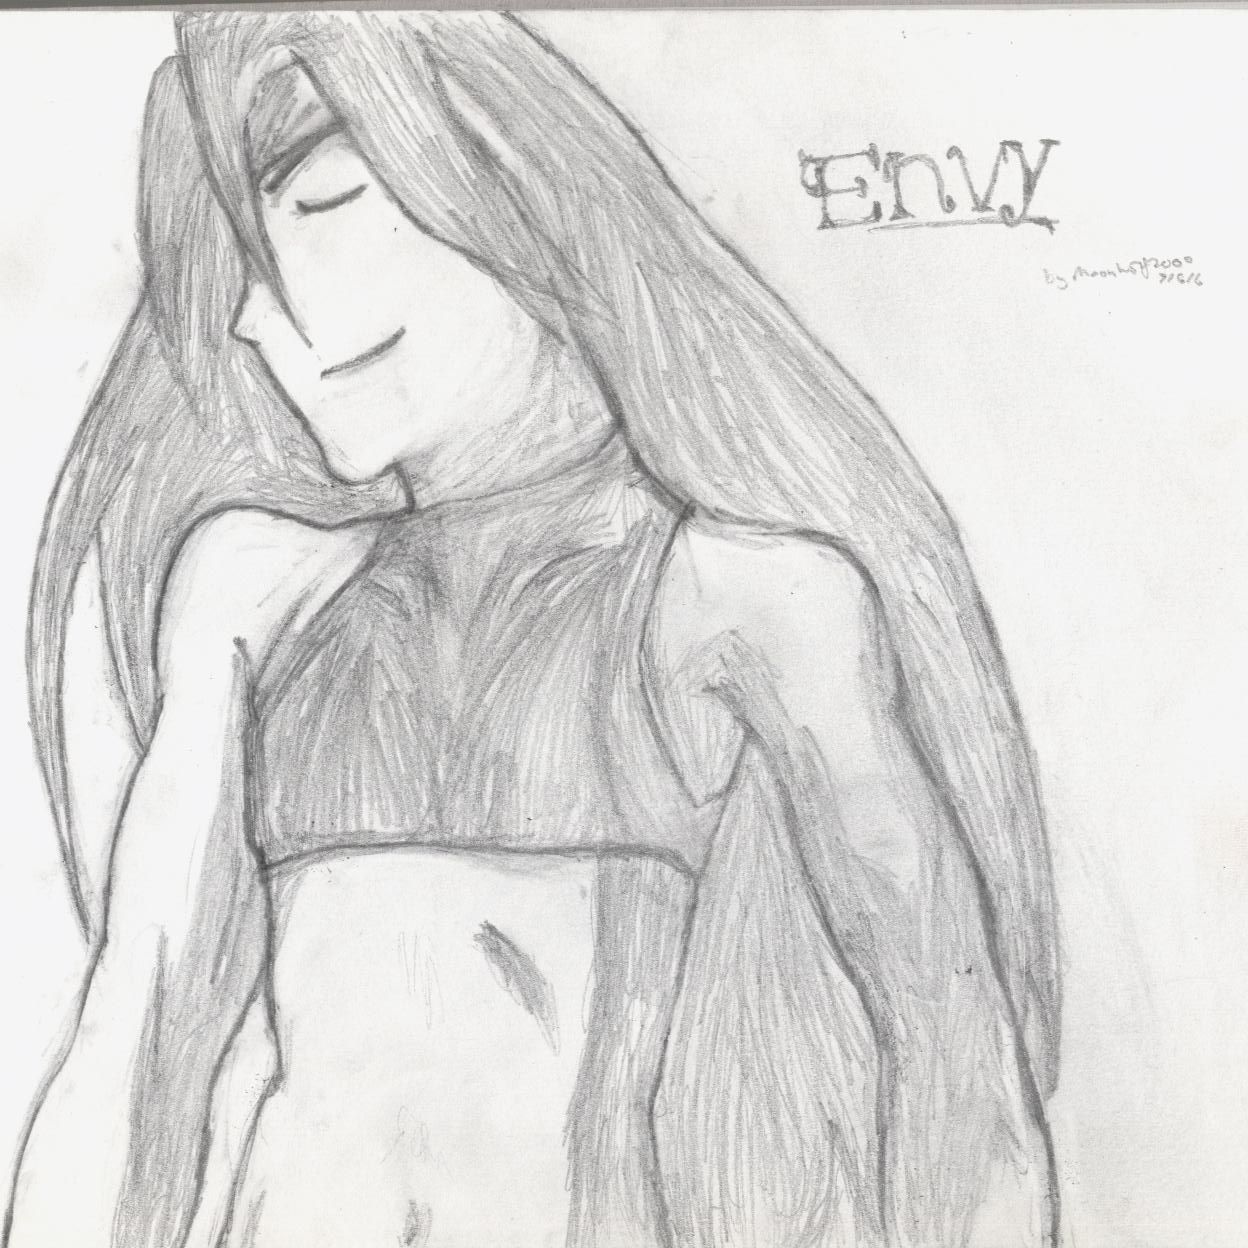 Envy (better than first one) by MoonWolf2000